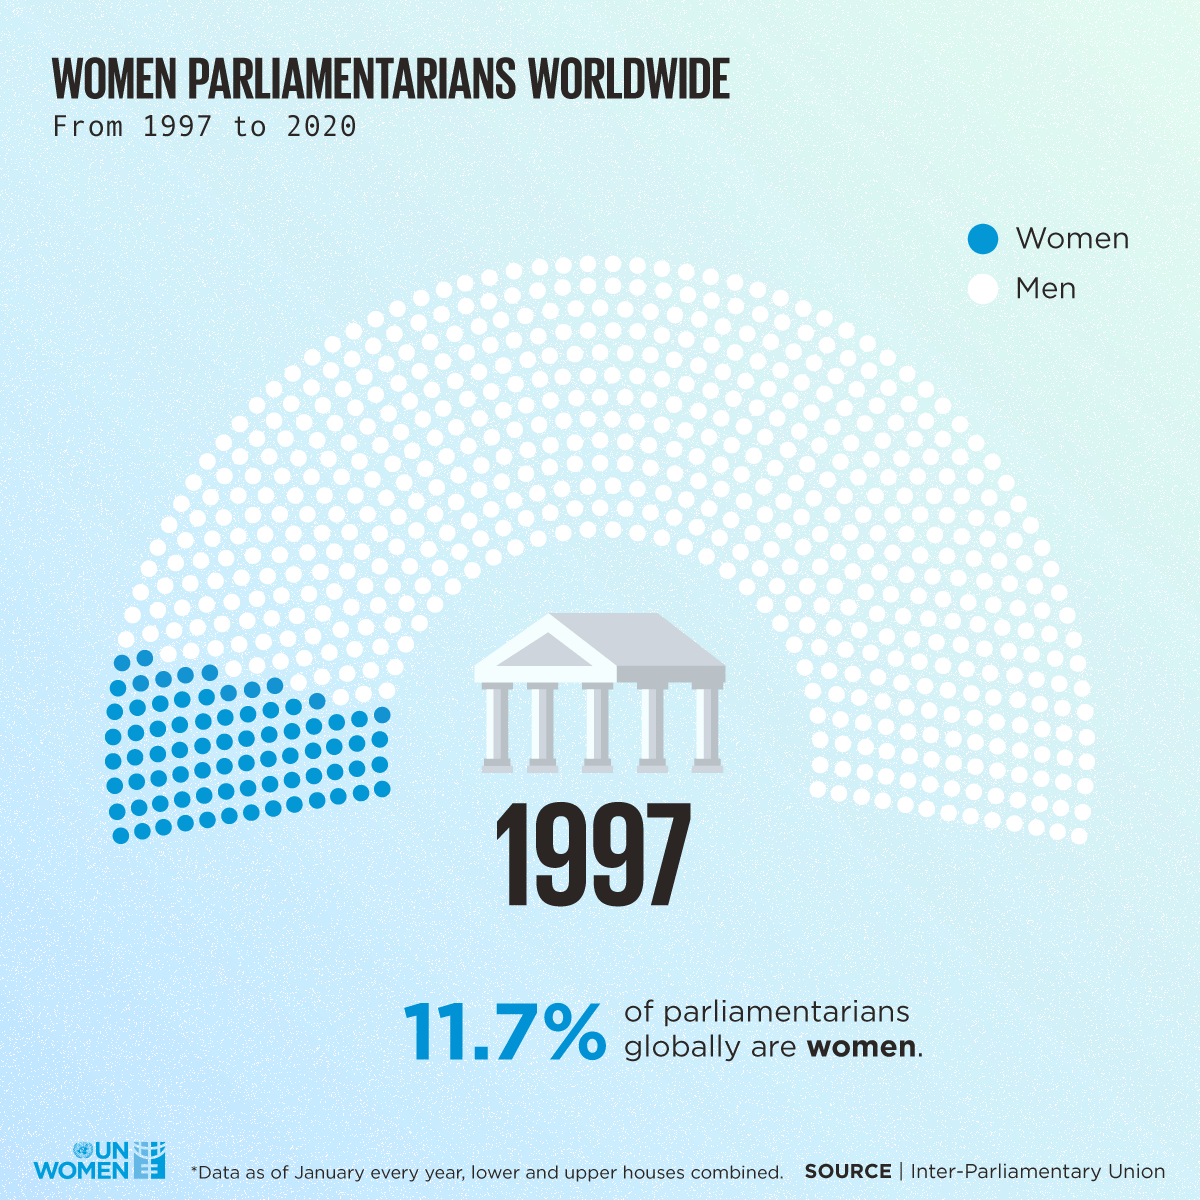 gif featuring percentage of parliamentarians from 1997 - 2020 (11.7% - 24.9%)